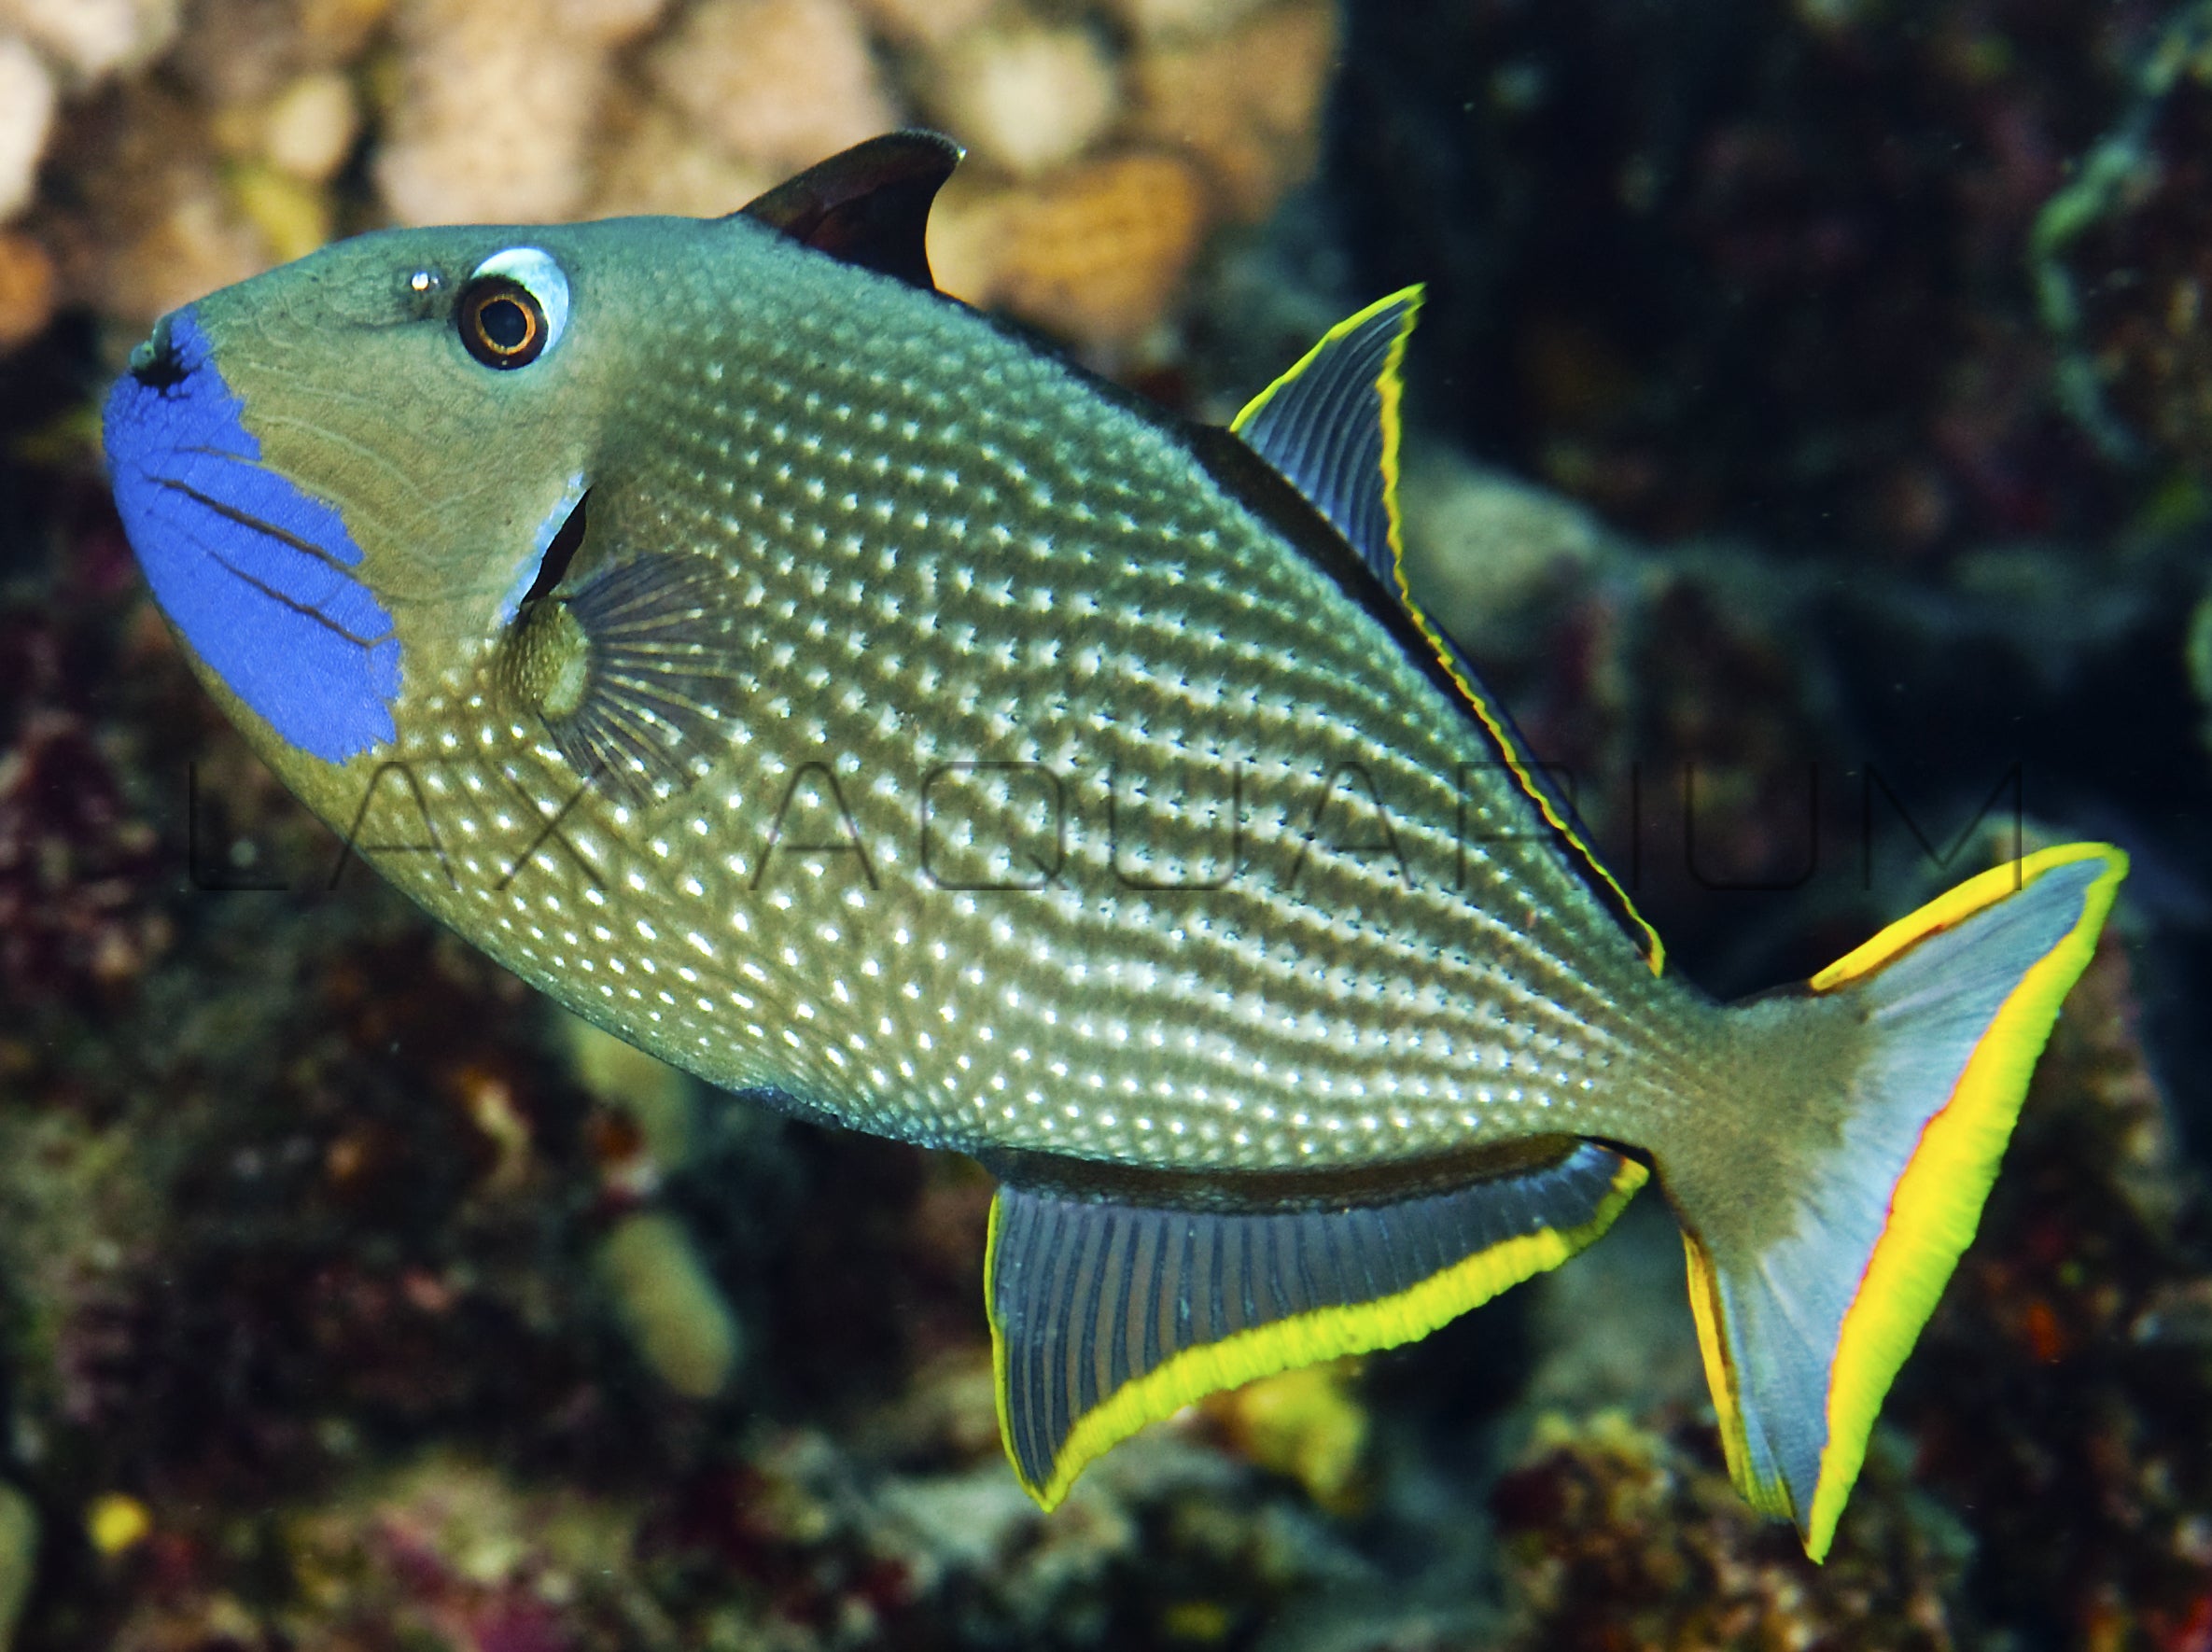 Detail photo for Blue Jaw Triggerfish